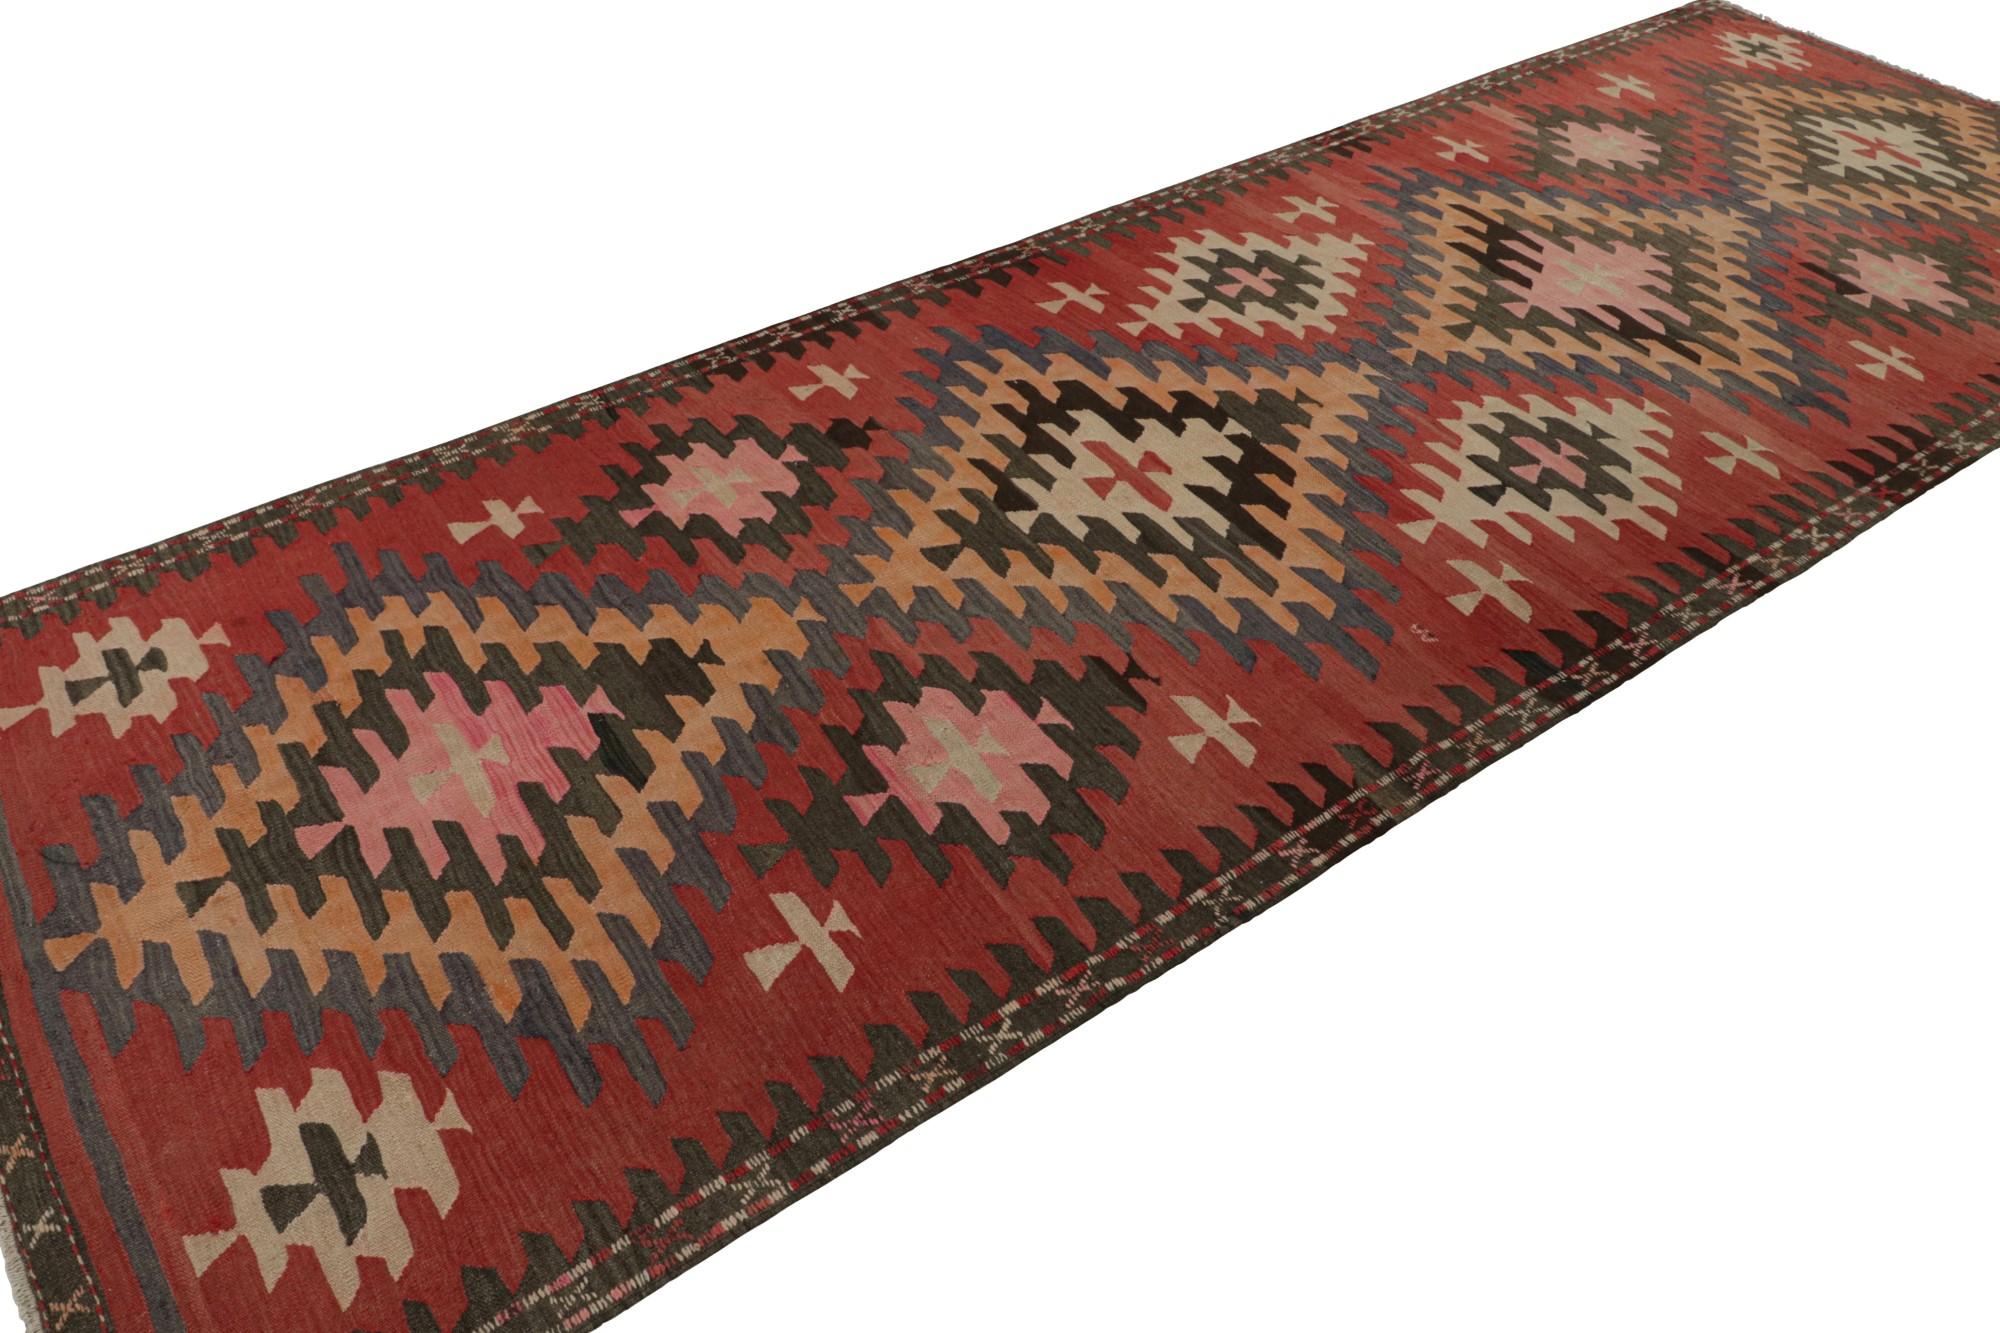 Handwoven in wool circa 1950-1960, this 5x14 vintage Afghani Kilim is a new curation from Rug & Kilim’s primitivist flatweaves. 

On the Design:

Specifically believed to originate from an Afghani tribe, this gallery runner boasts colorful medallion